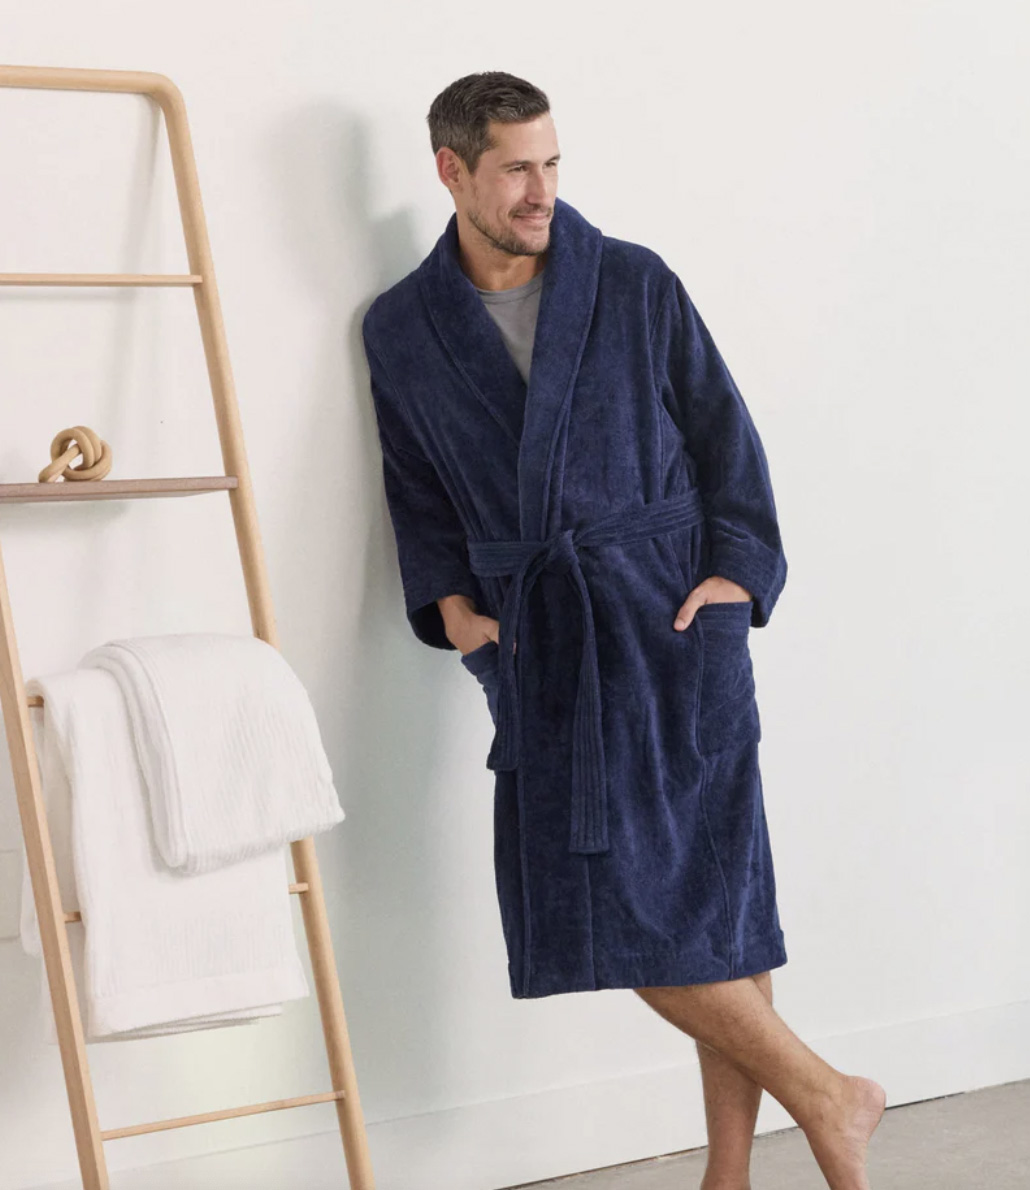 6 Sustainable Robes That Will Make You Feel Like Royalty